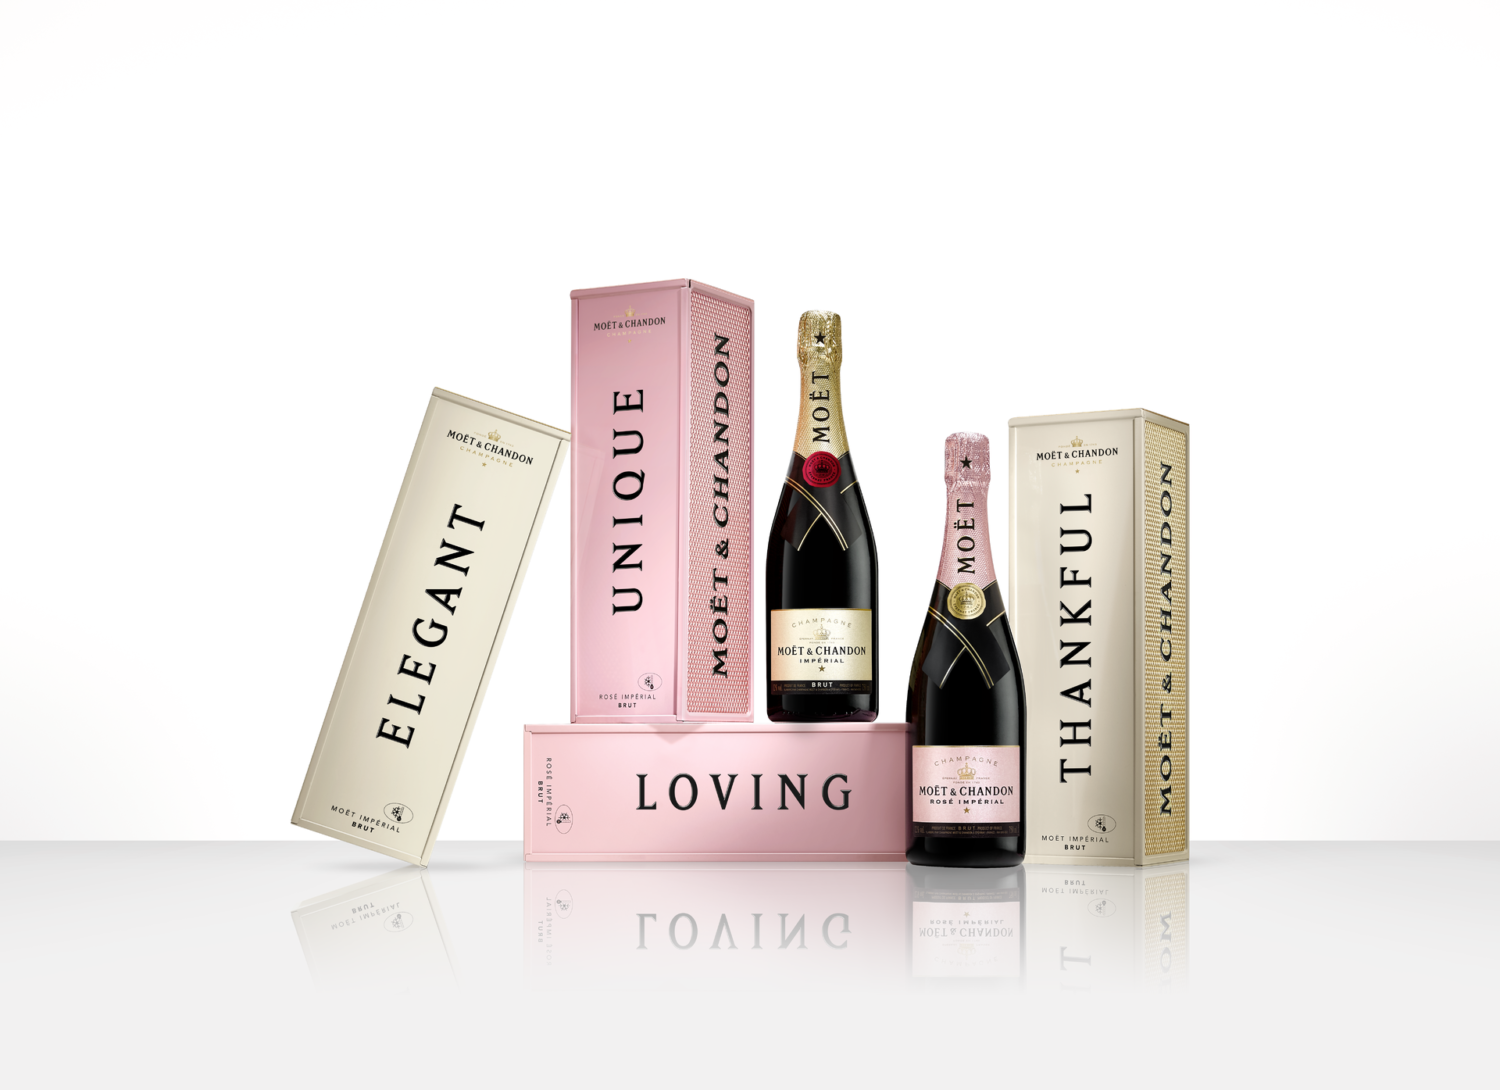 Moet Chandon Imperial Brut Mix 75 Beautyshot AYL Specially Yours 2020 Giftbox Name high.width 1920x prop